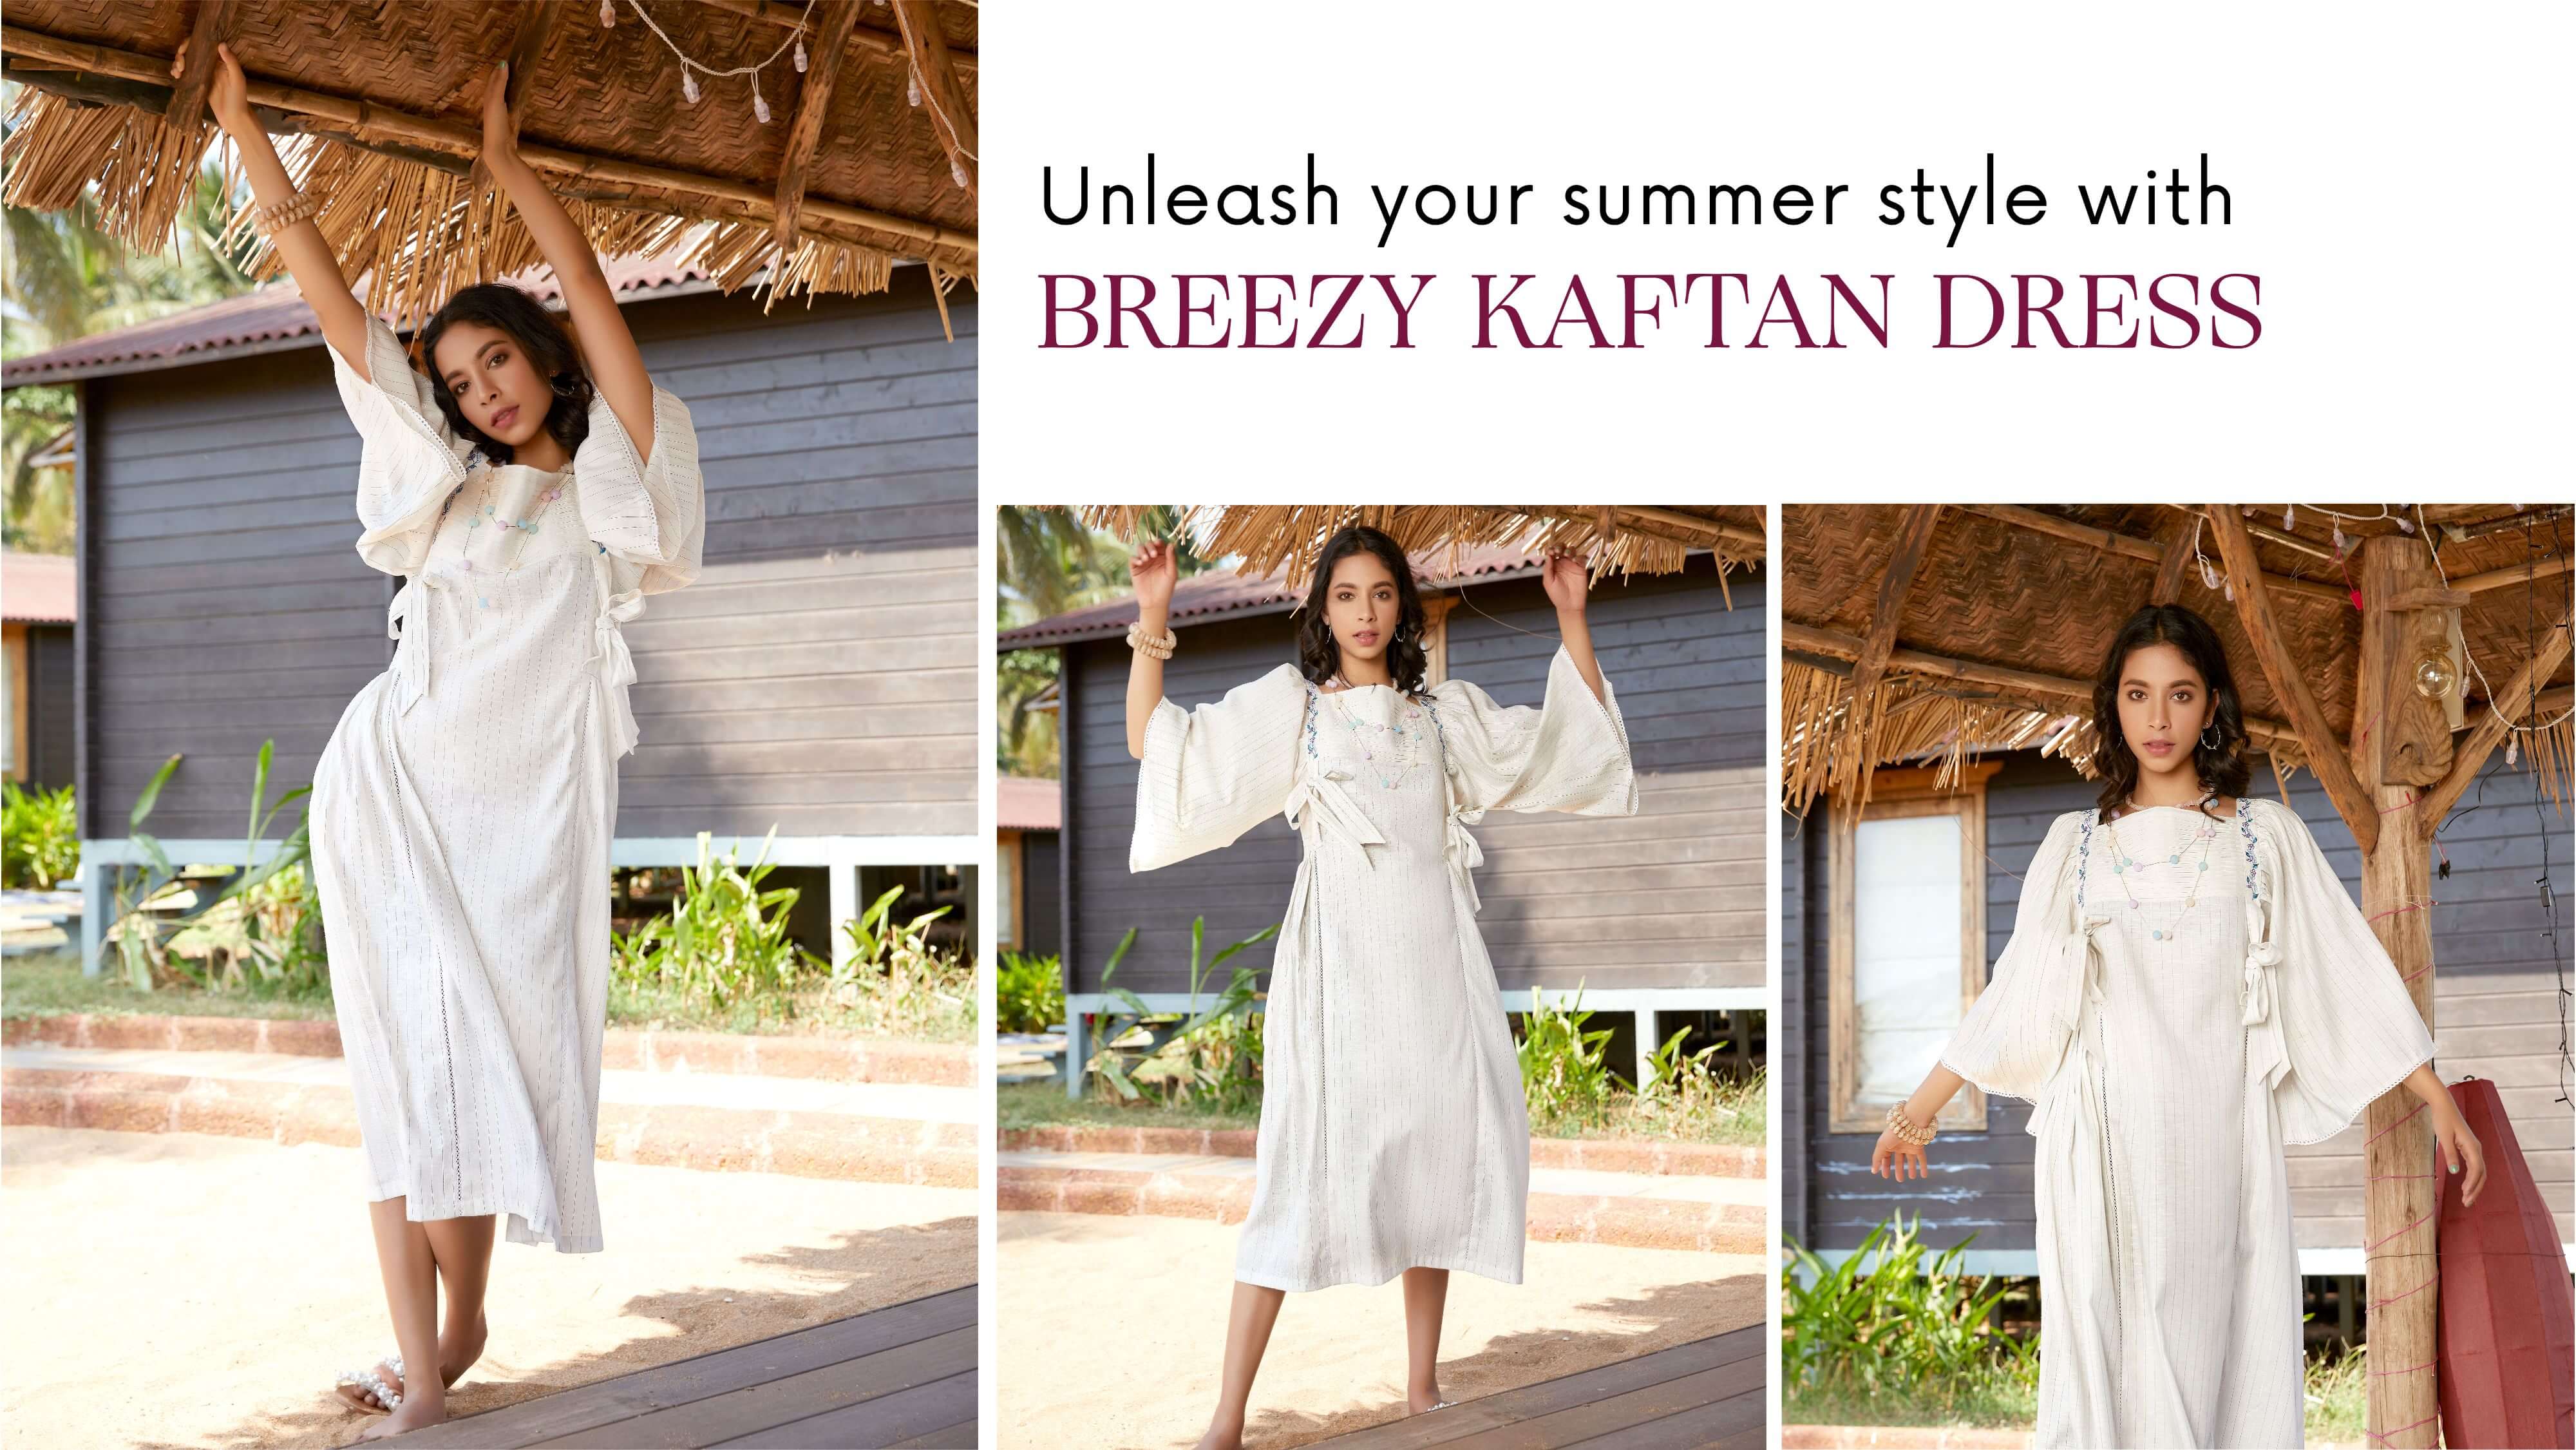 Style In Summer With Breezy Kaftan Dresses